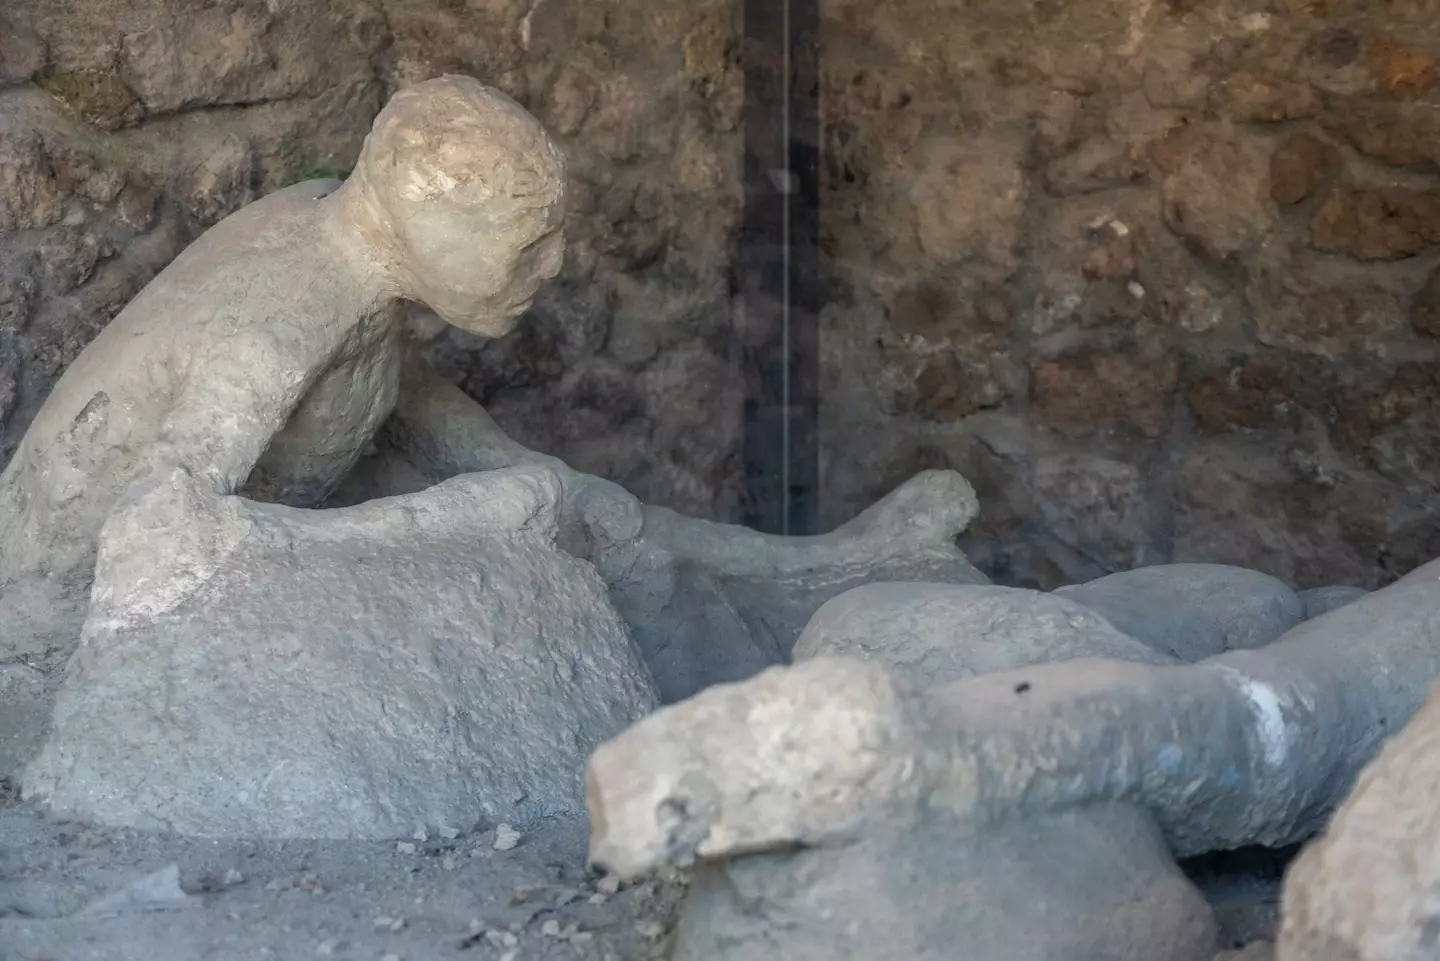 The new study explains why the Pompeiians were 'frozen in suspended actions'.